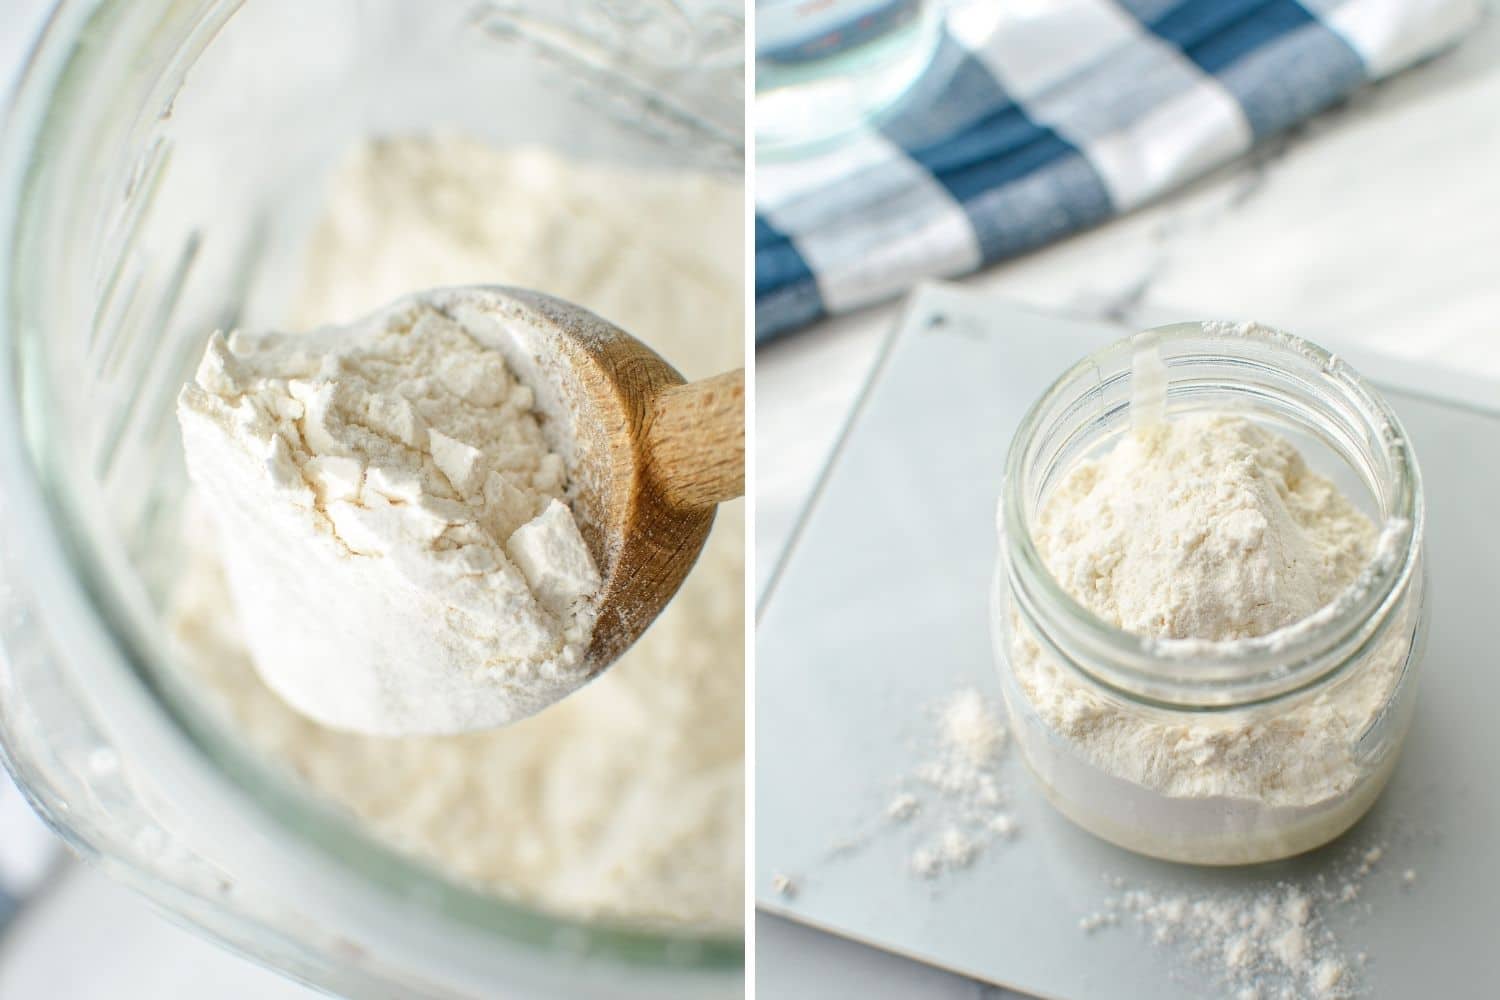 Adding flour to a small jar of sourdough starter to revive it.